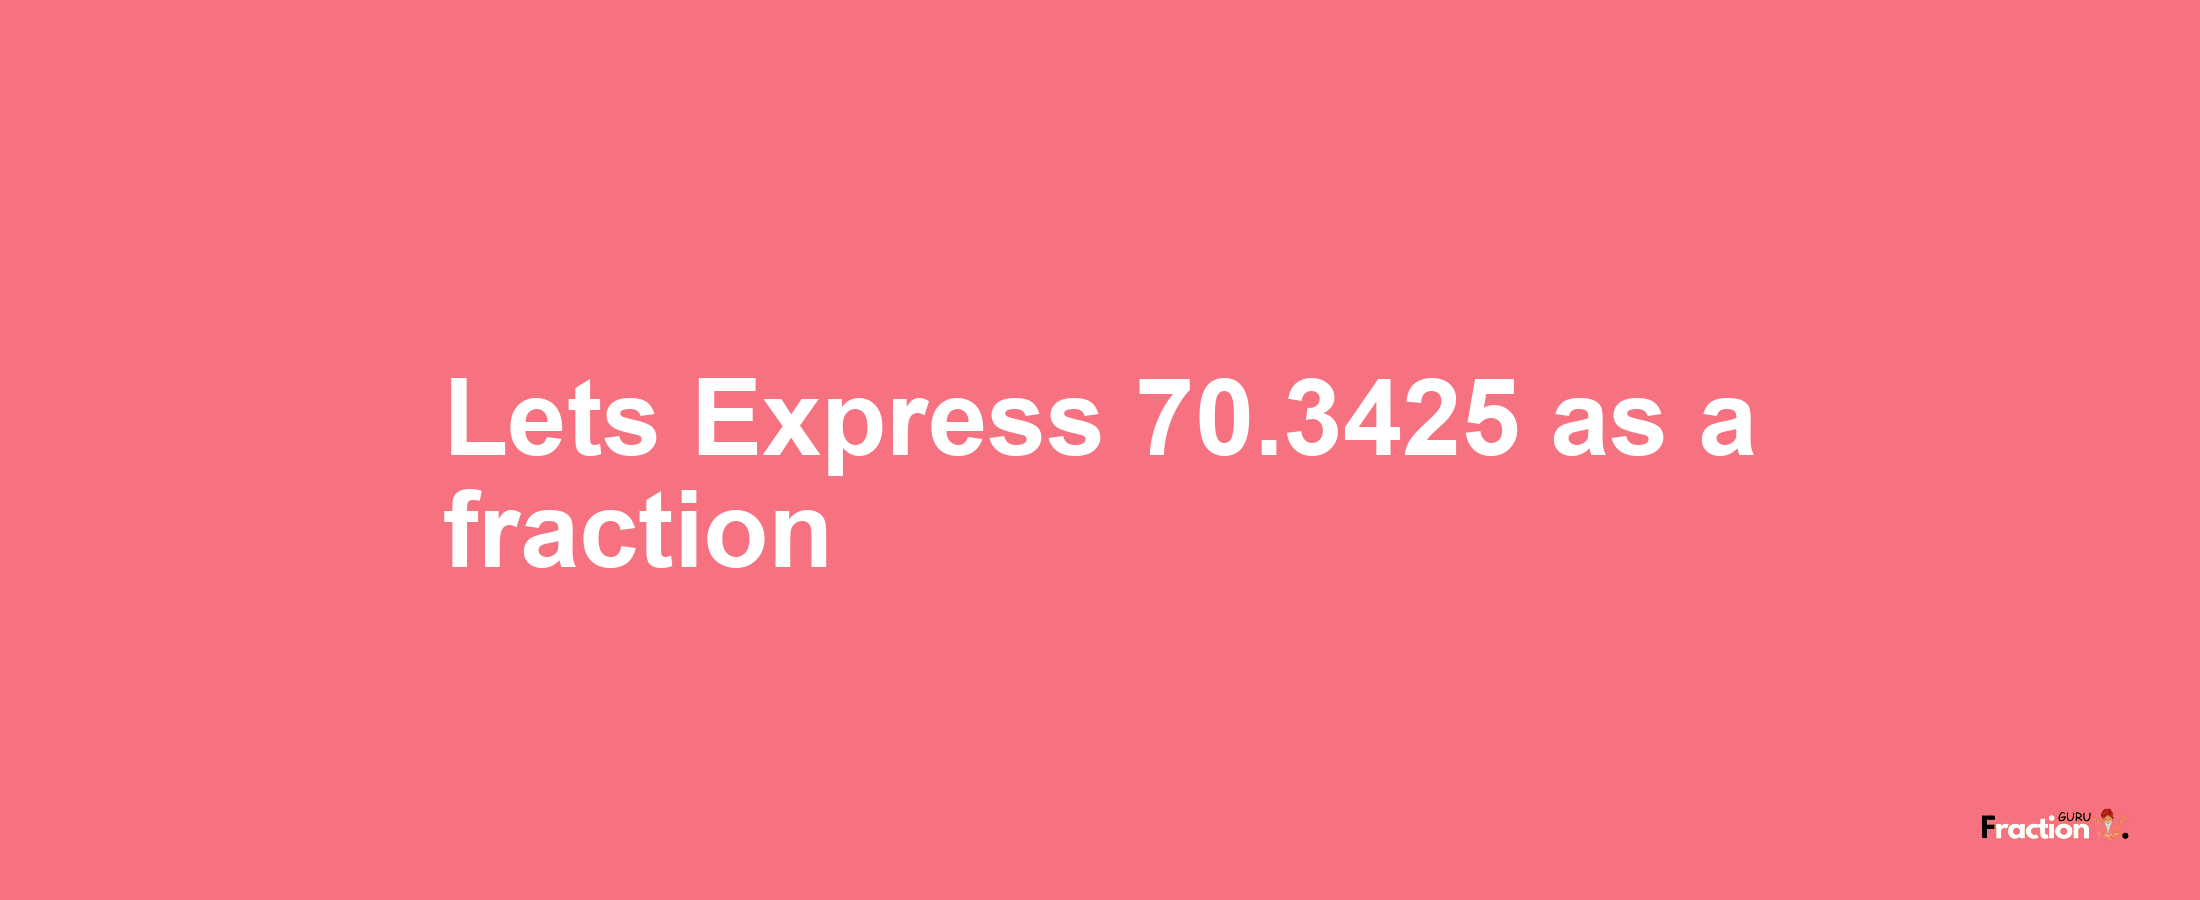 Lets Express 70.3425 as afraction